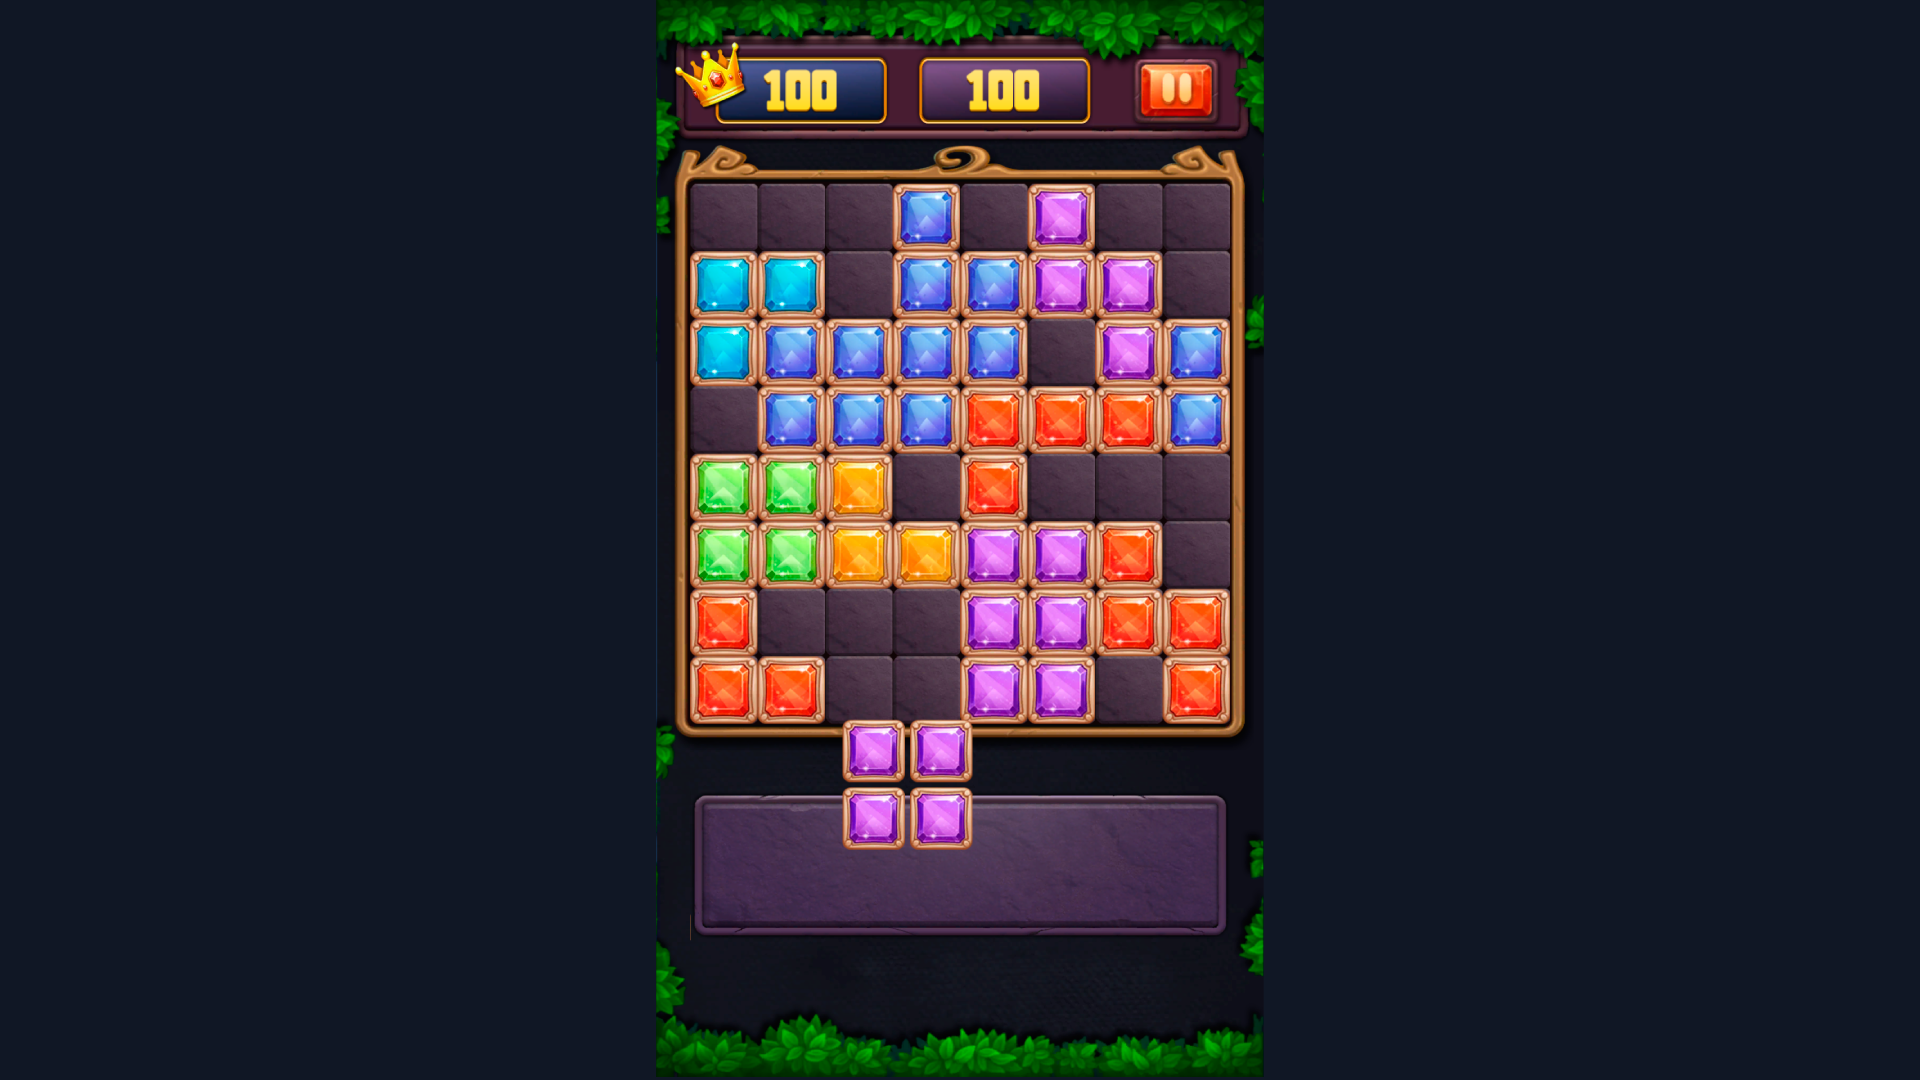 Block Puzzle 1010 Legend: Amazon.ca: Appstore for Android